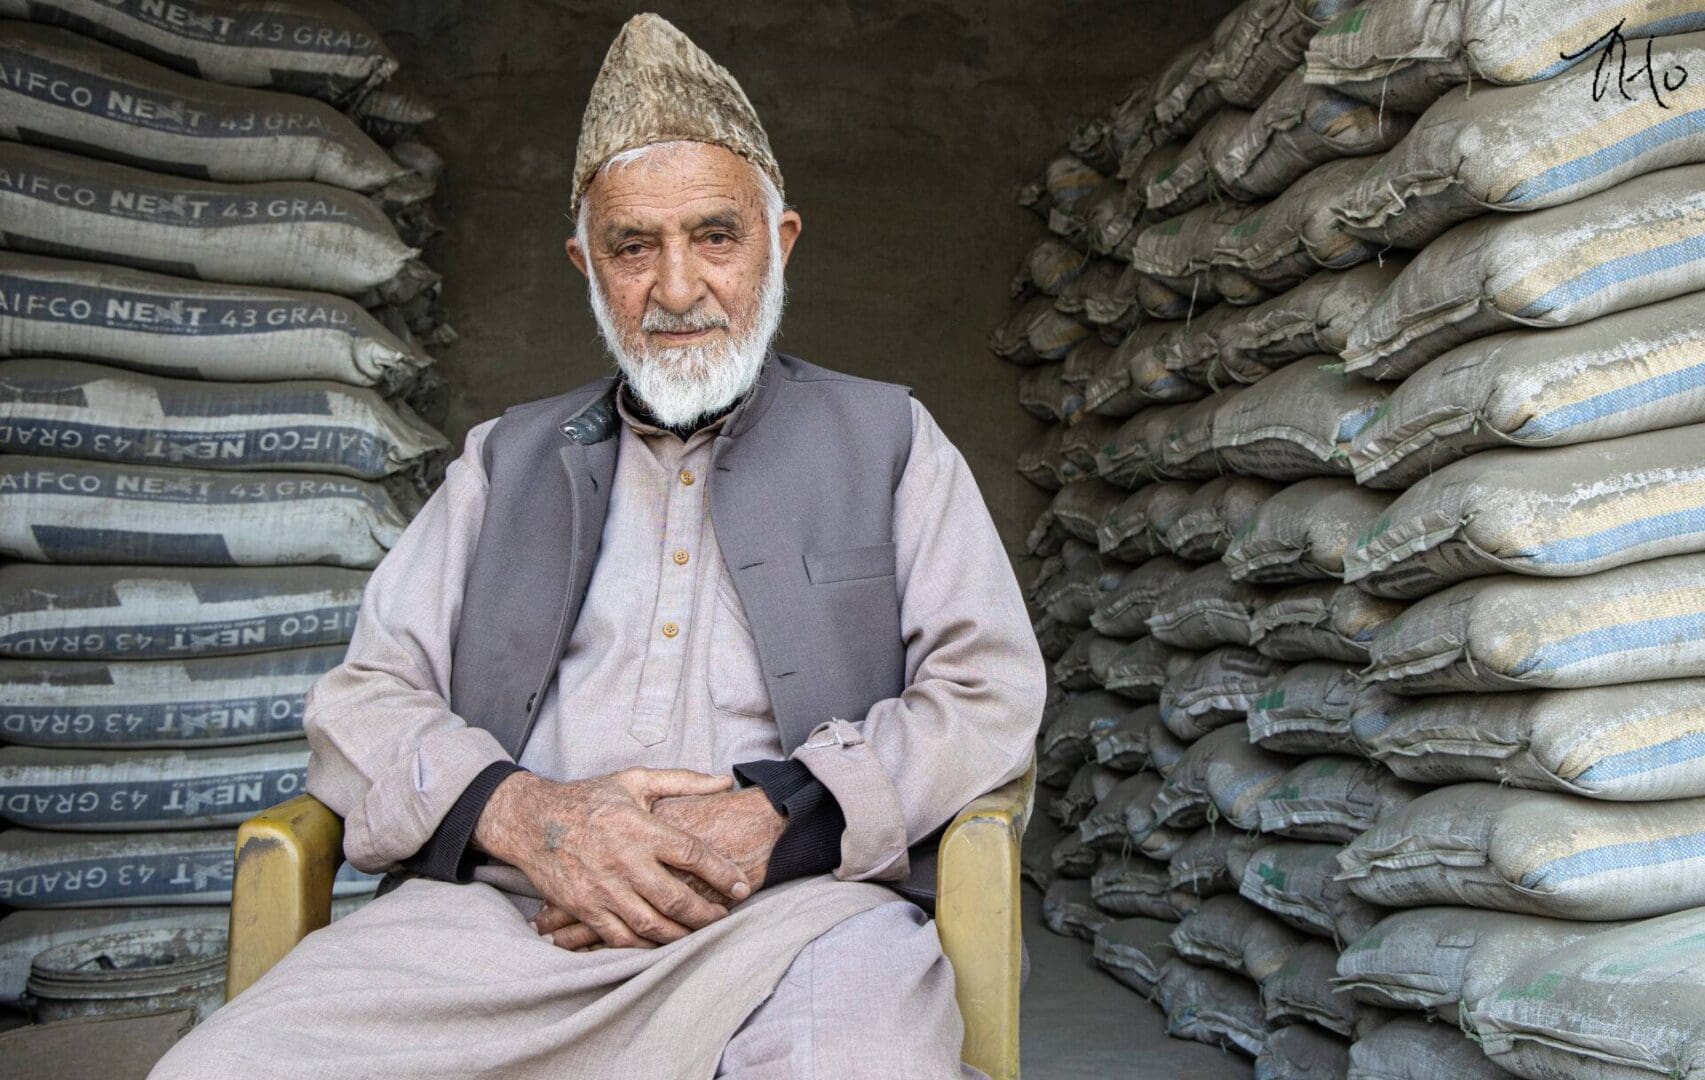 A man sitting in front of sacks of flour.